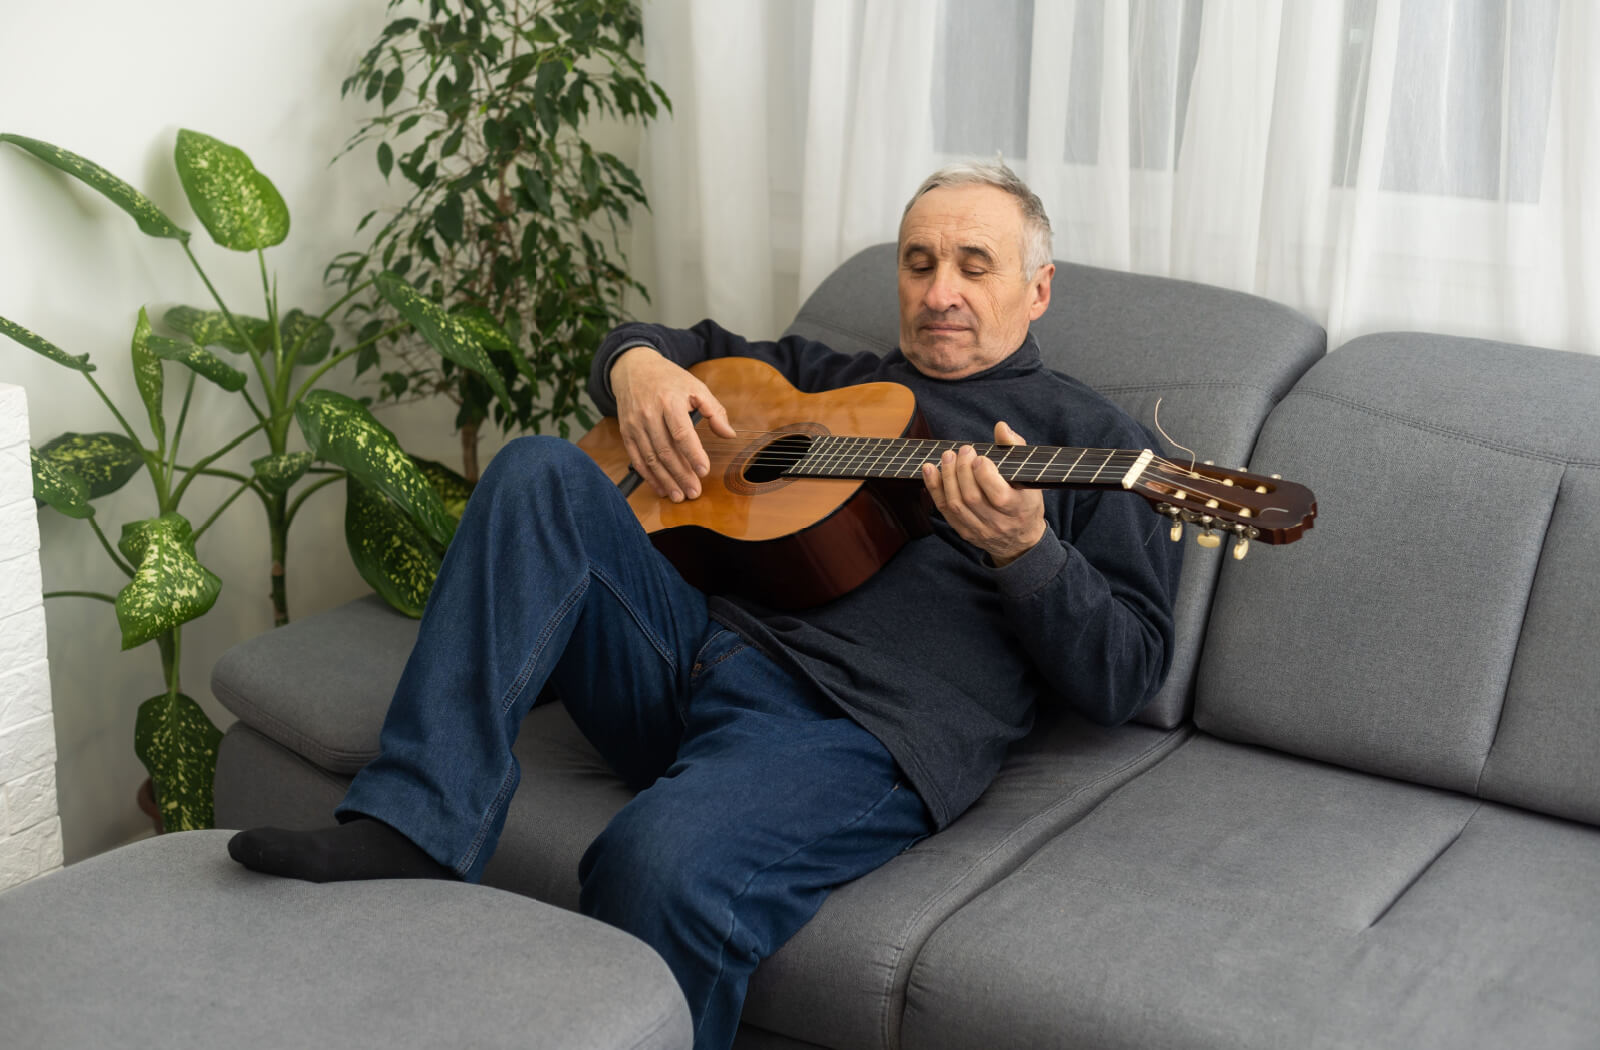 An older adult man playing a guitar while sitting on a couch.